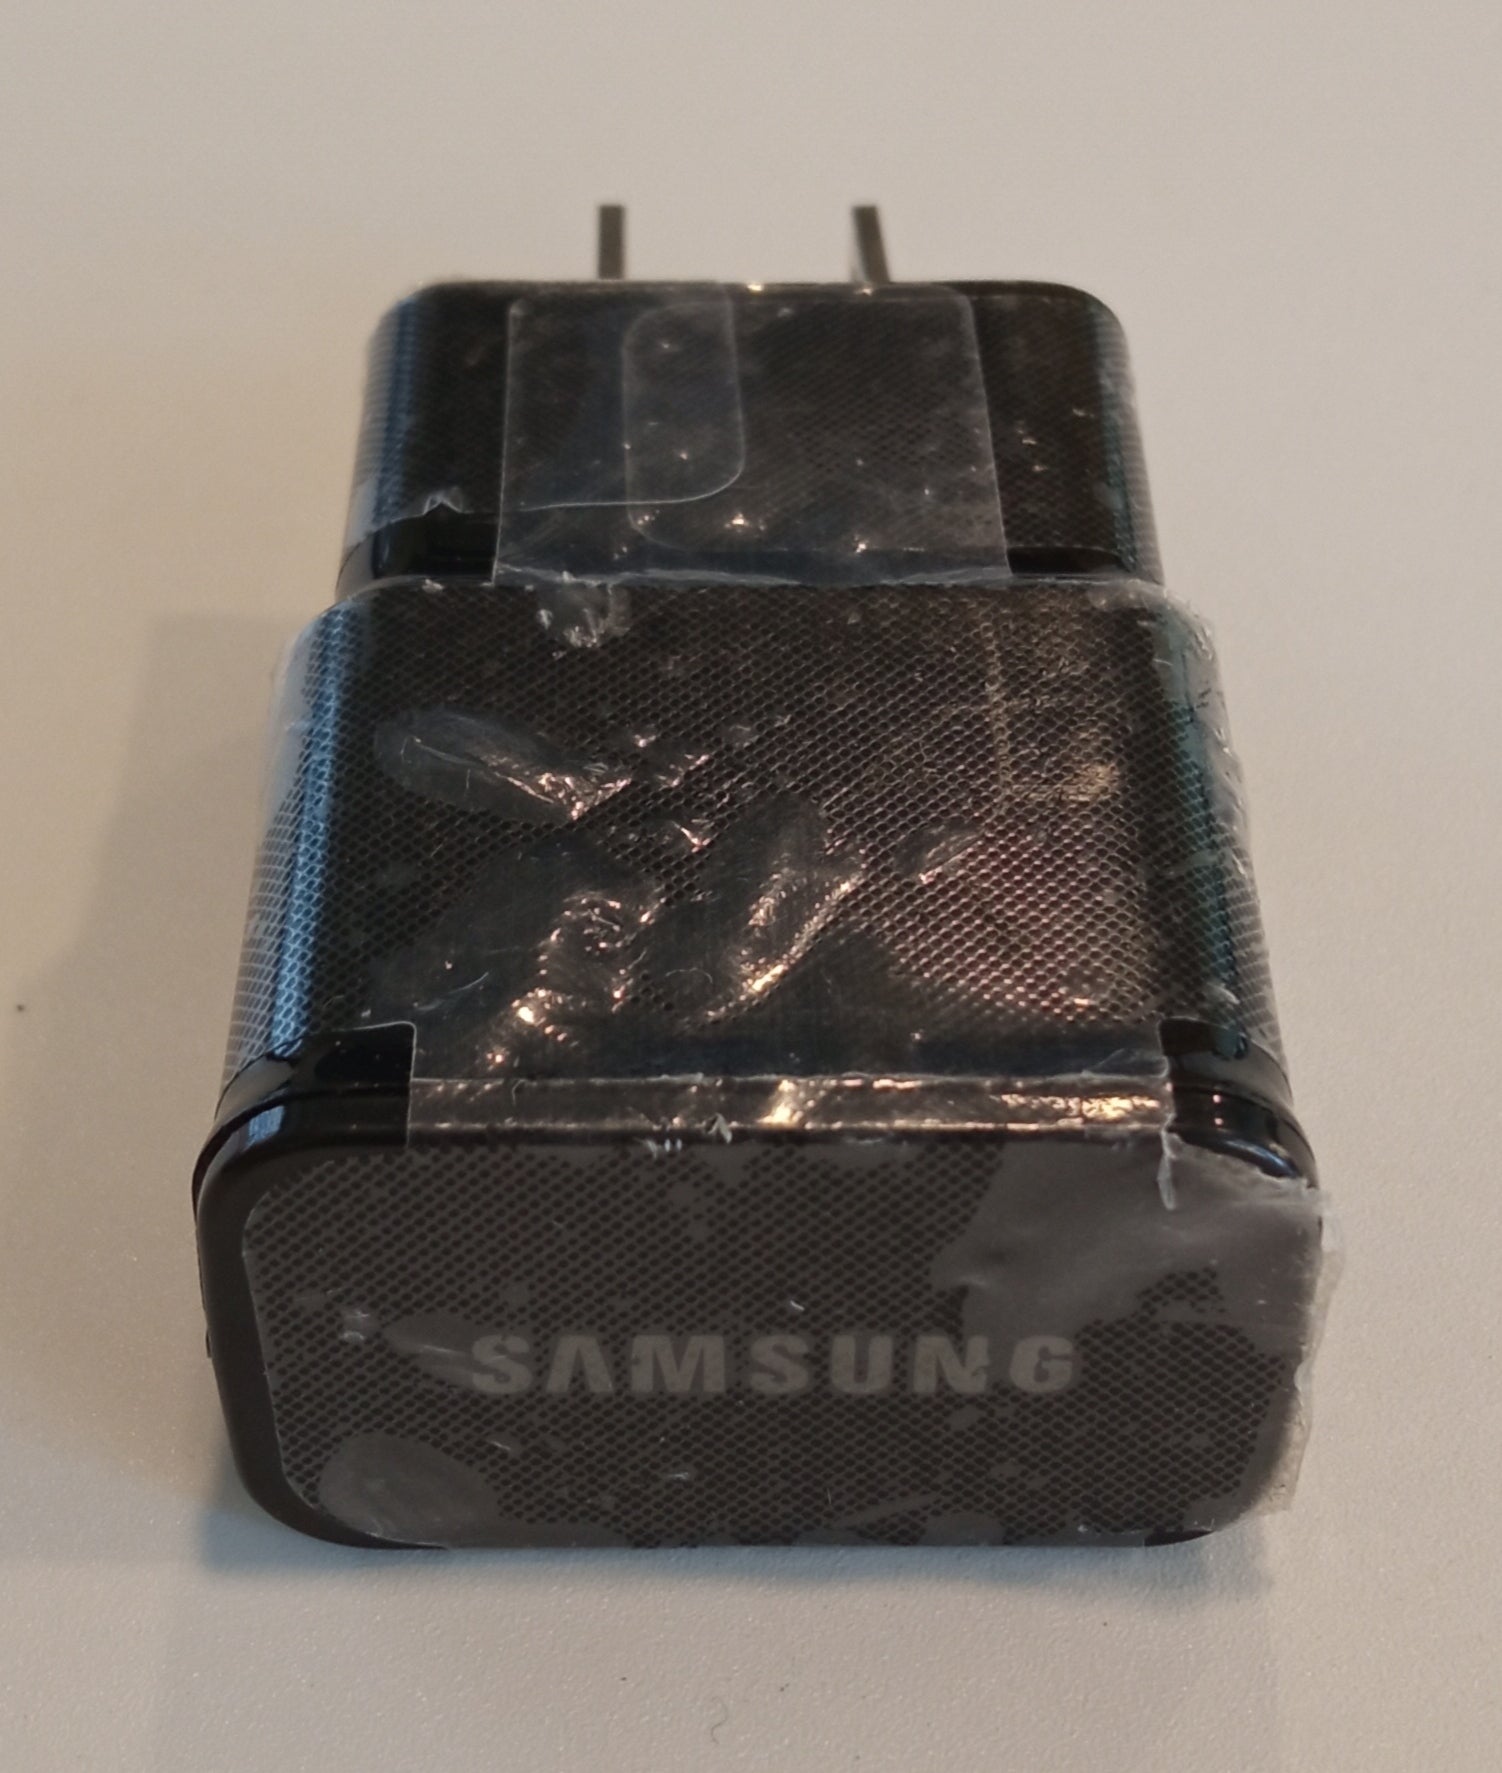 Samsung Fast Charging Travel Adapter - US Imported